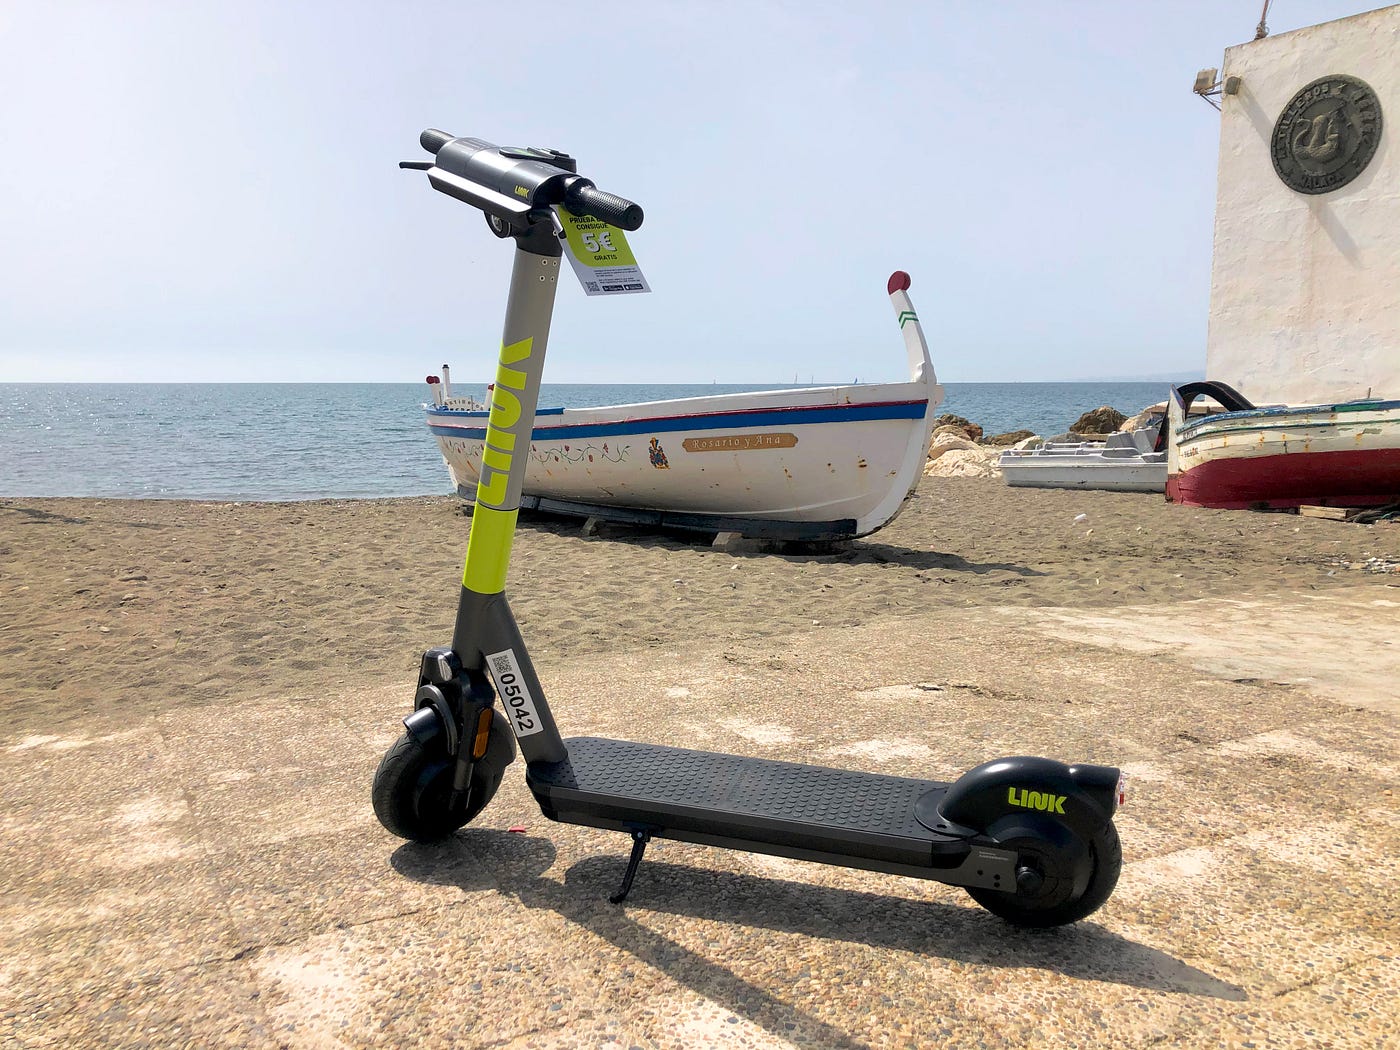 Malaga Welcomes Scooters. Superpedestrian enters its third city… | by LINK by | Medium